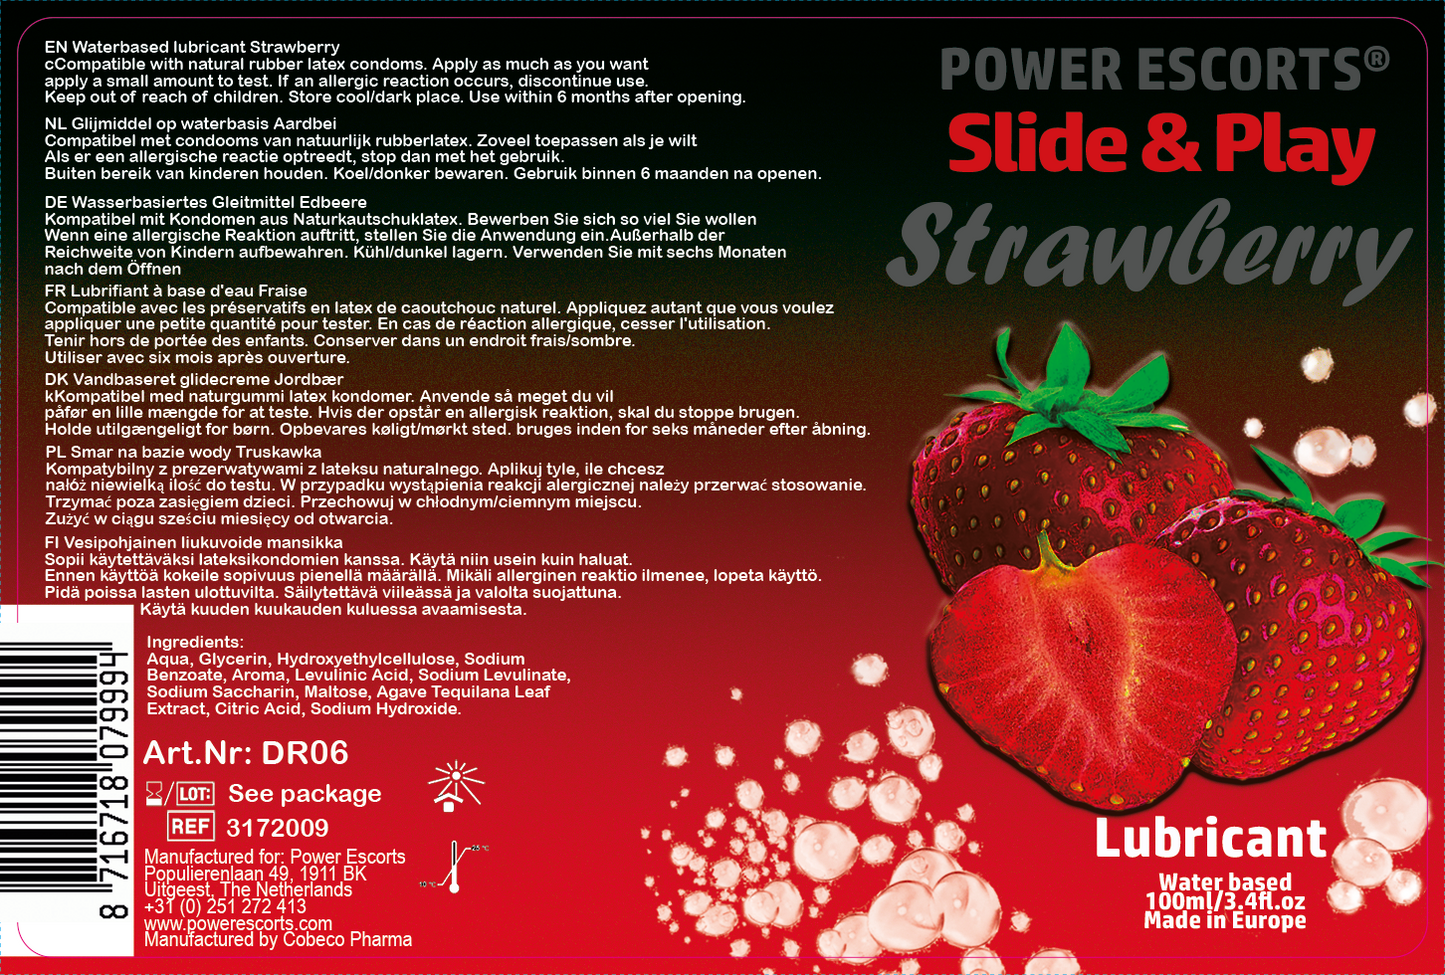 Power Escorts - DR06 - Strawberry Lubricant 100 ML - Slide & Play - Waterbased